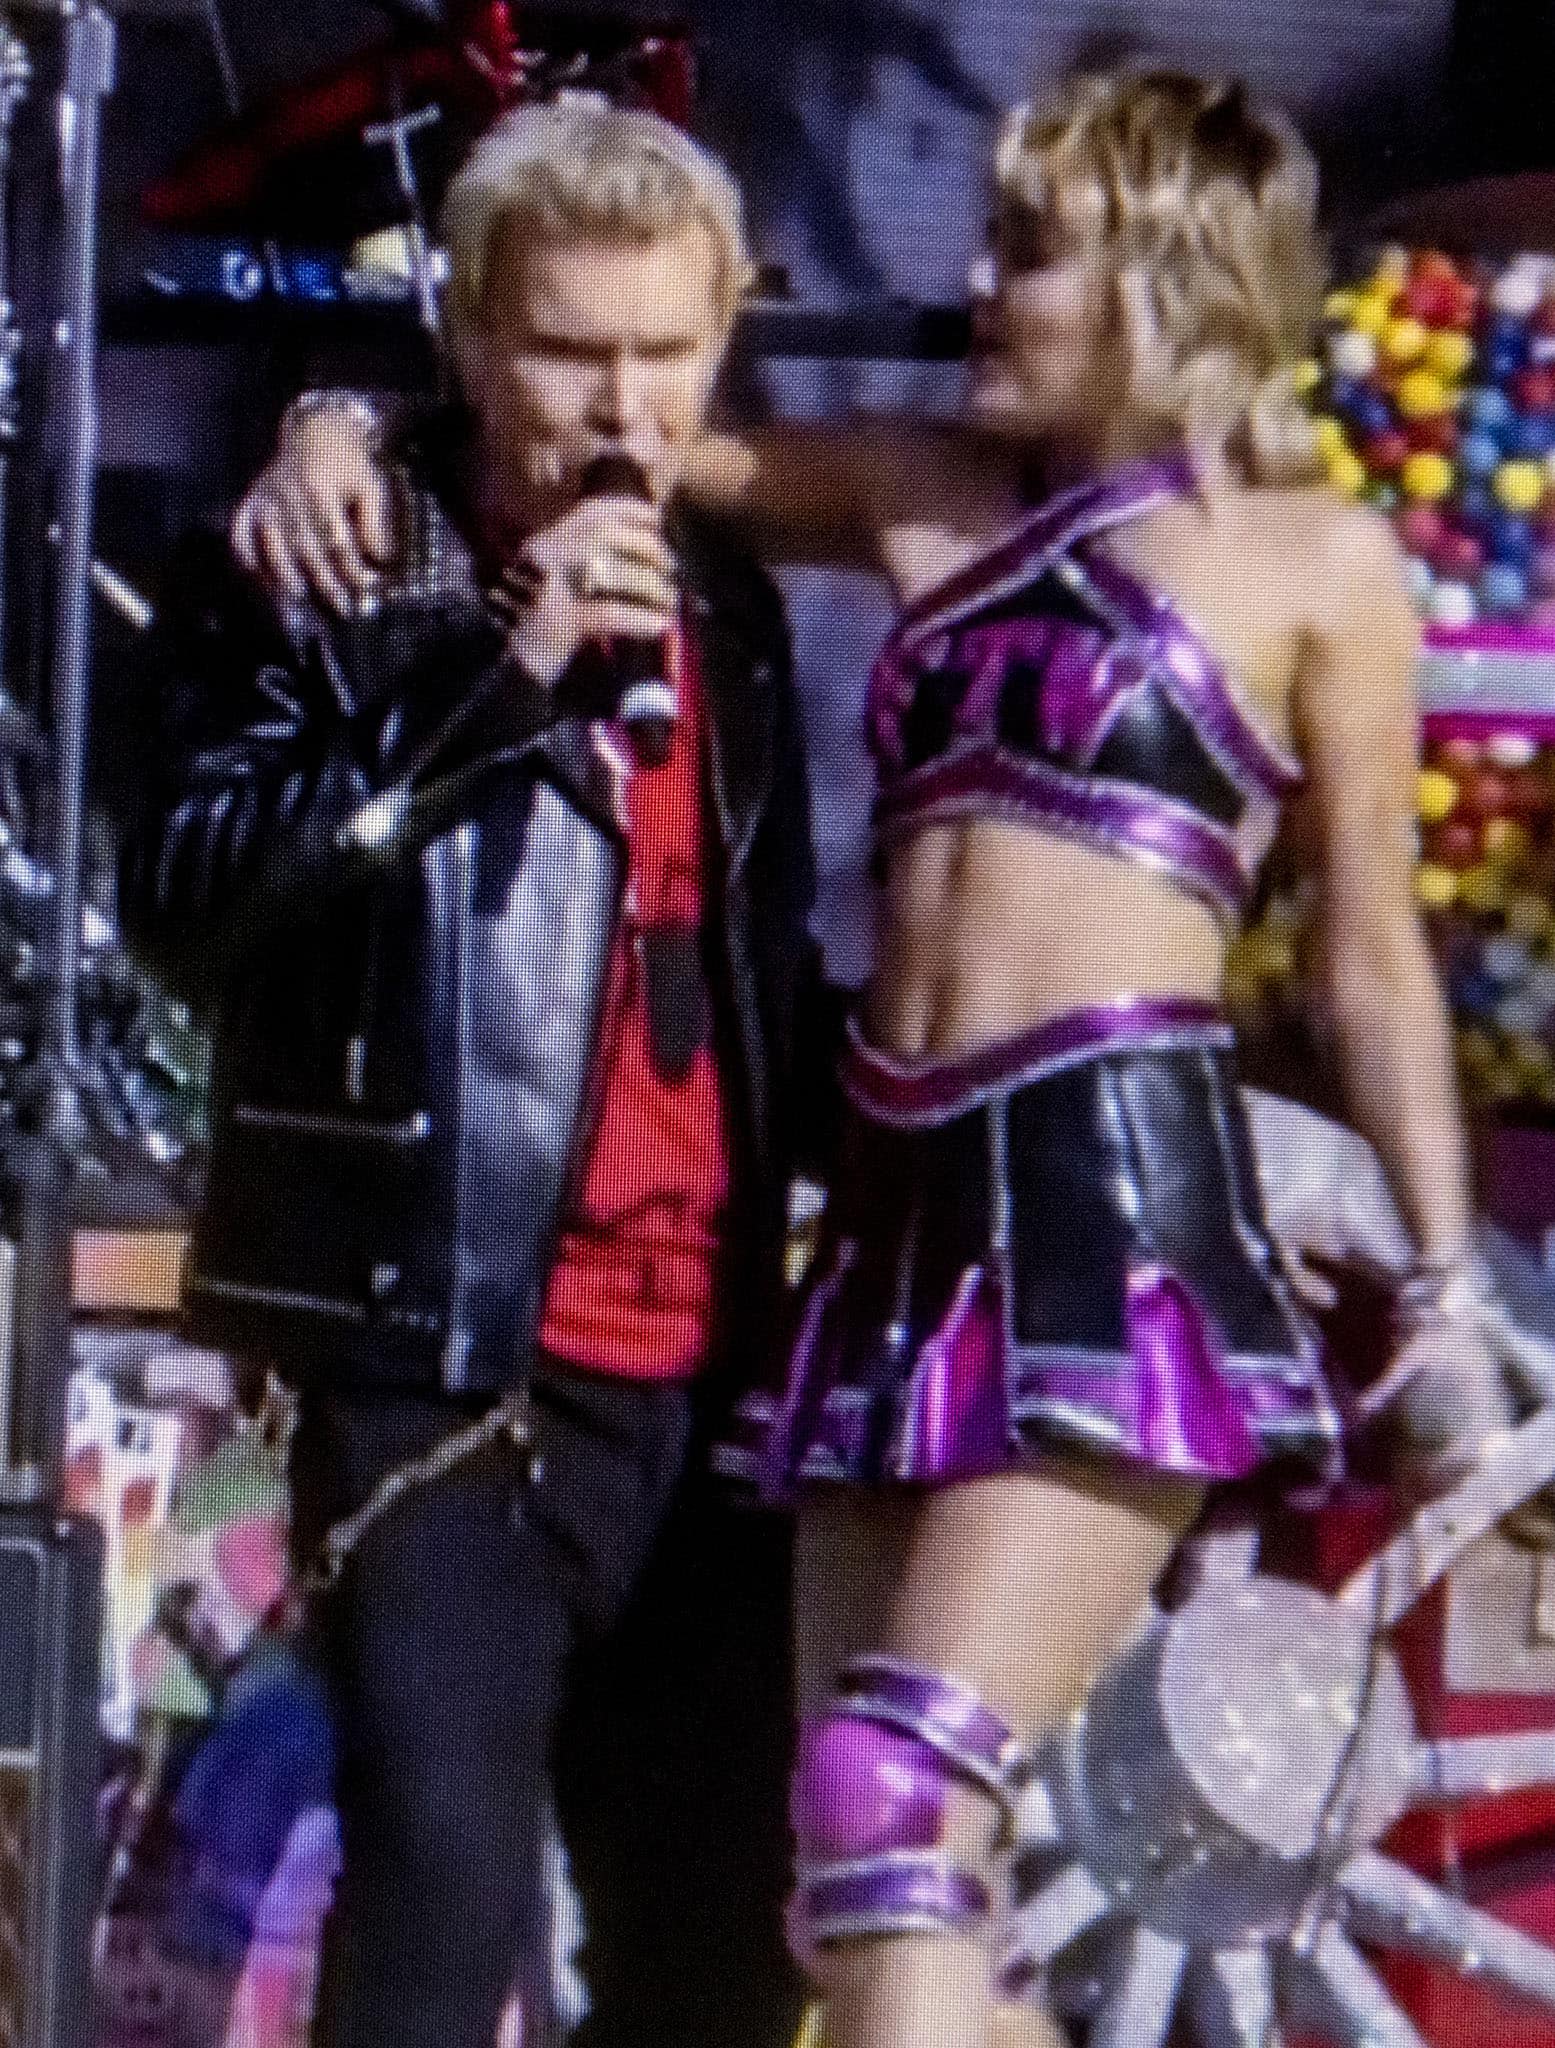 Miley Cyrus performs with music icon Billy Idol